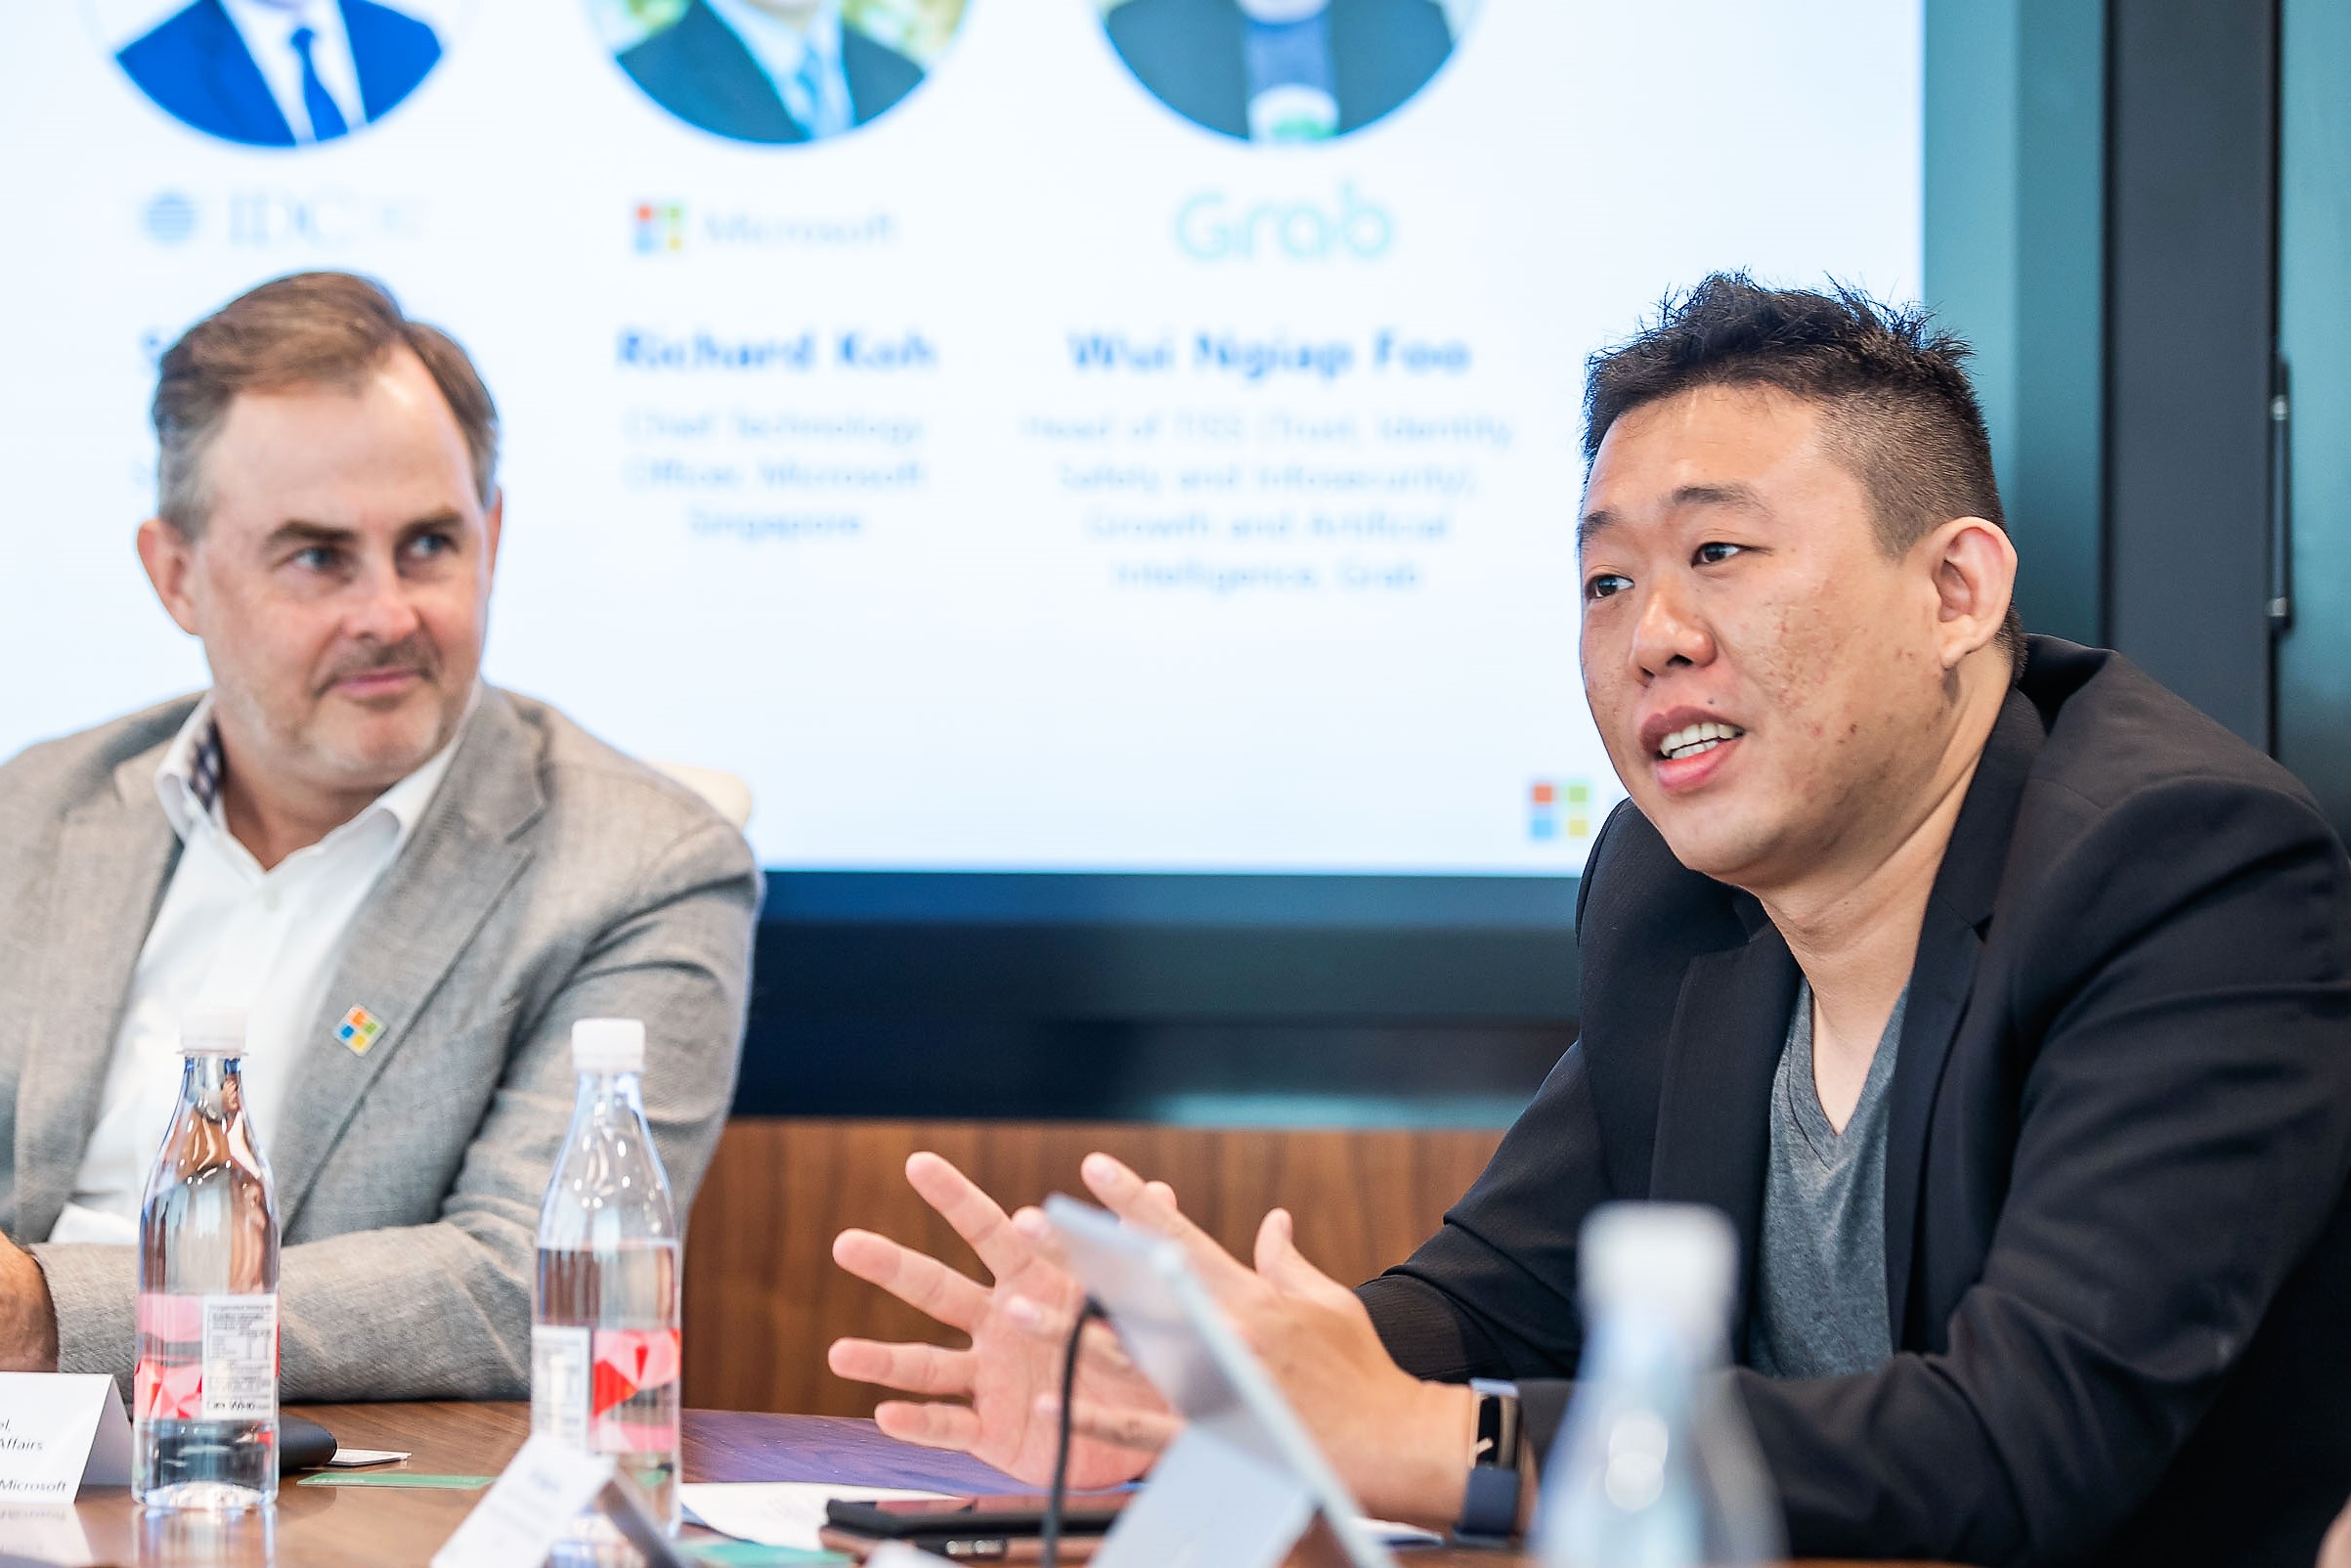 Antony Cook, Associate General Counsel for Corporate External and Legal Affairs at Microsoft Asia (left) and Wui Ngiap Foo, Head of TISS (Trust, Identity, Safety, and Security) and Growth at Grab (right).